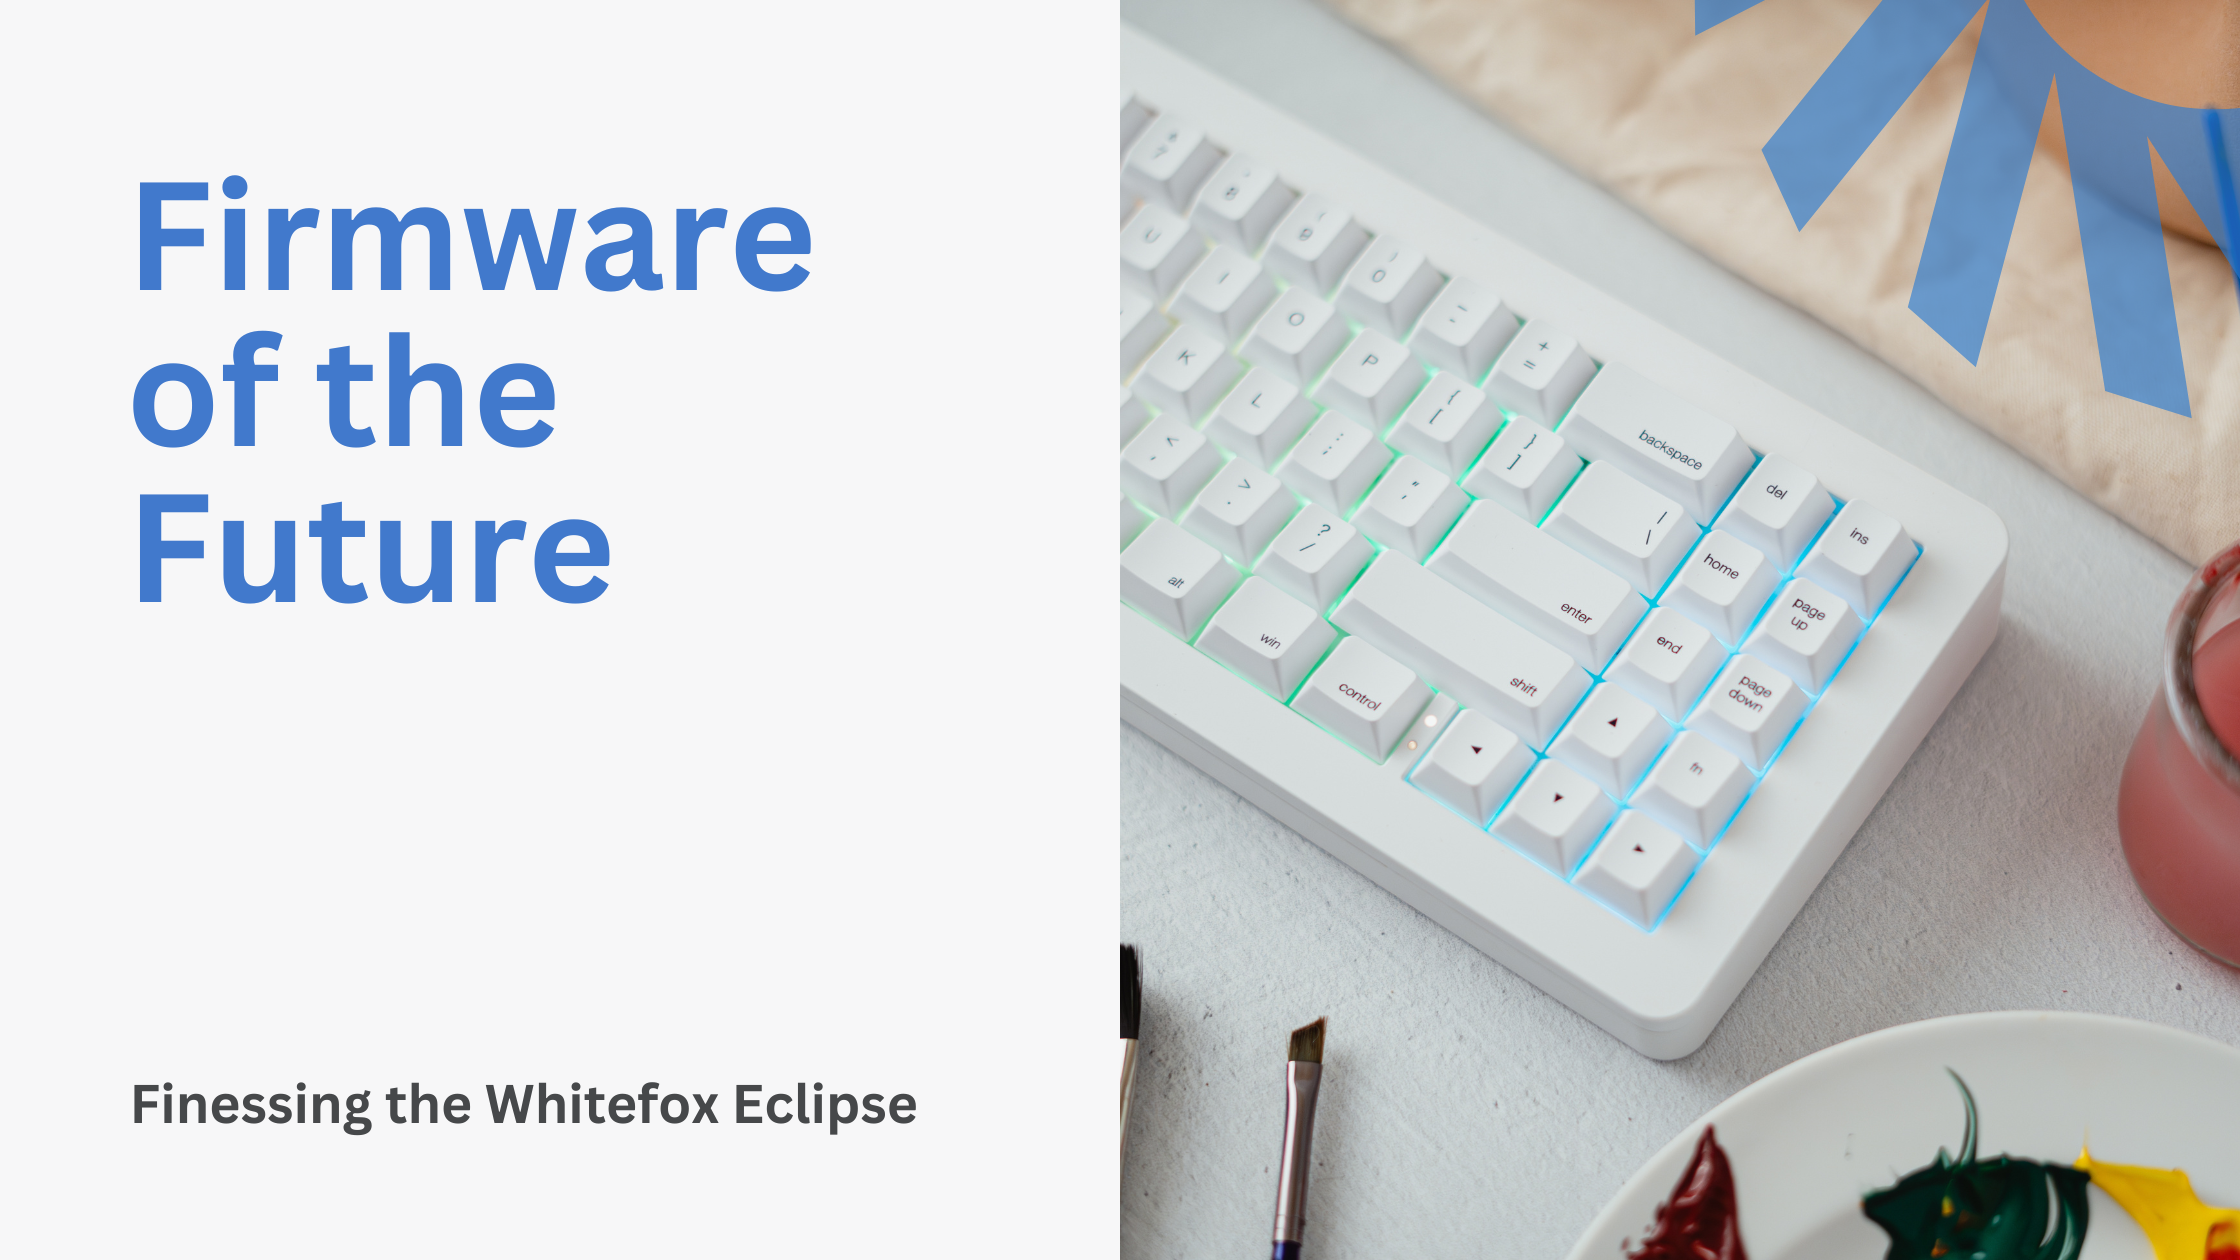 Firmware of the Future: Finessing the WhiteFox Eclipse